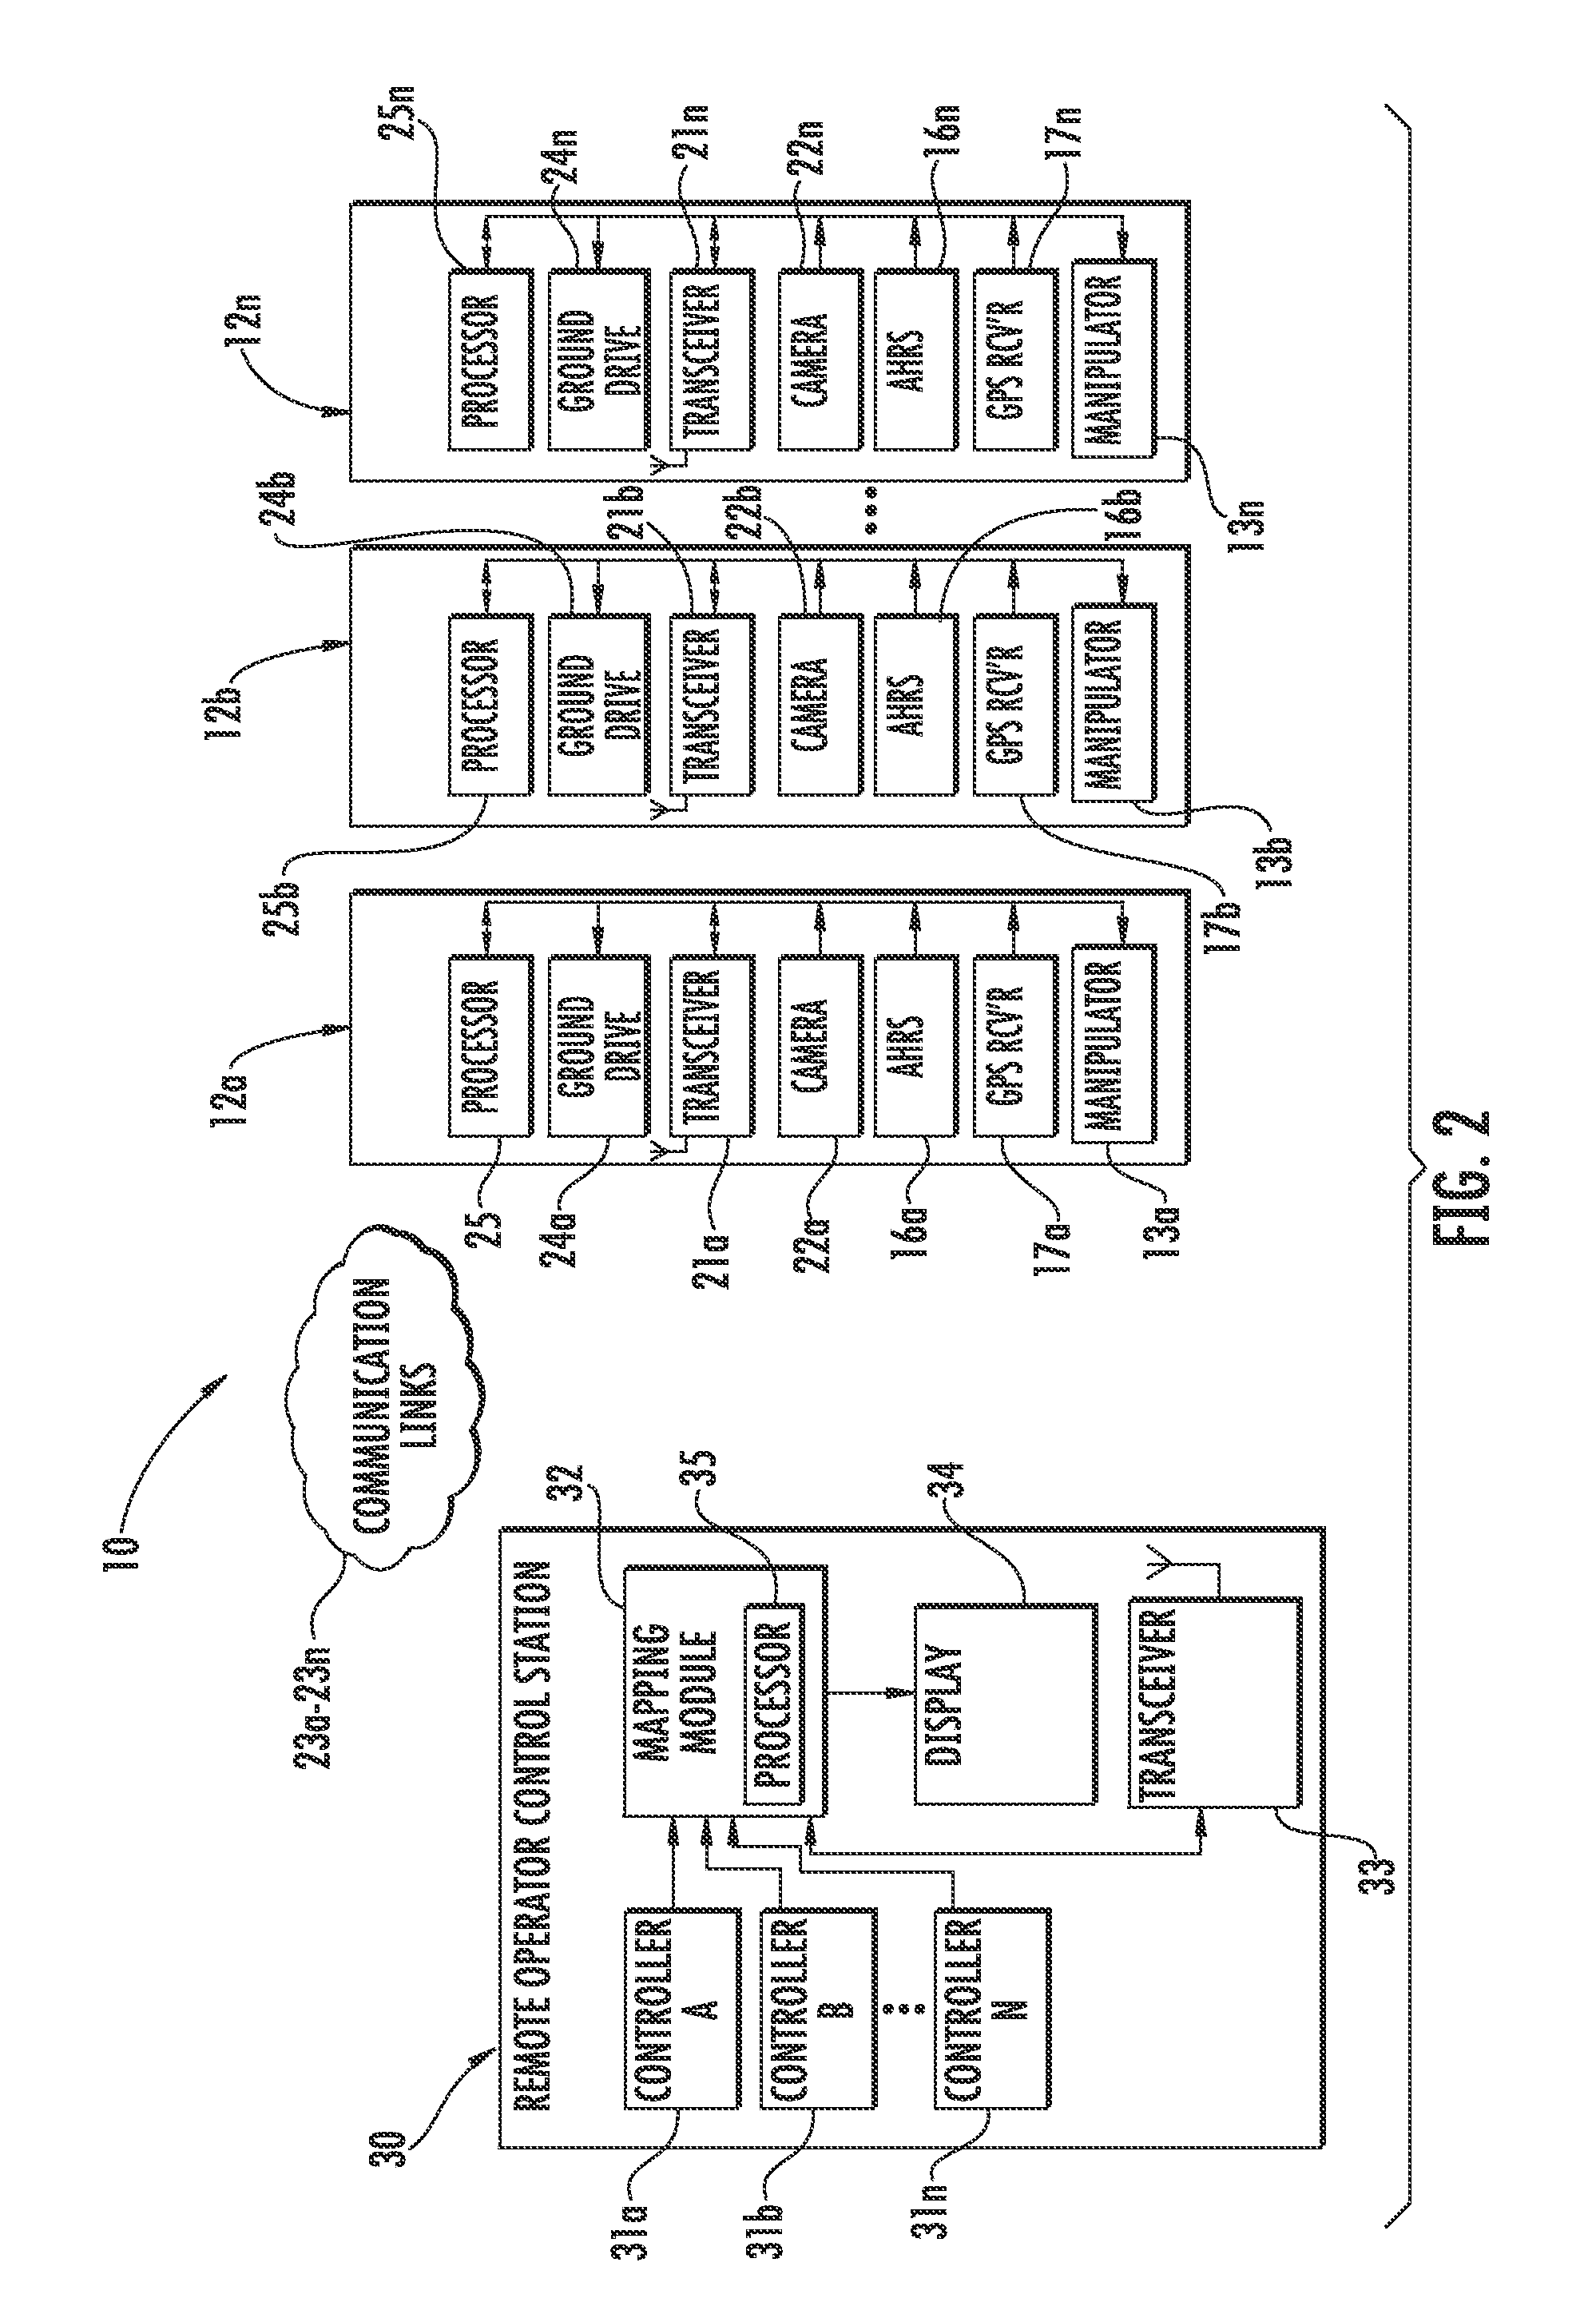 Coordinated action robotic system and related methods